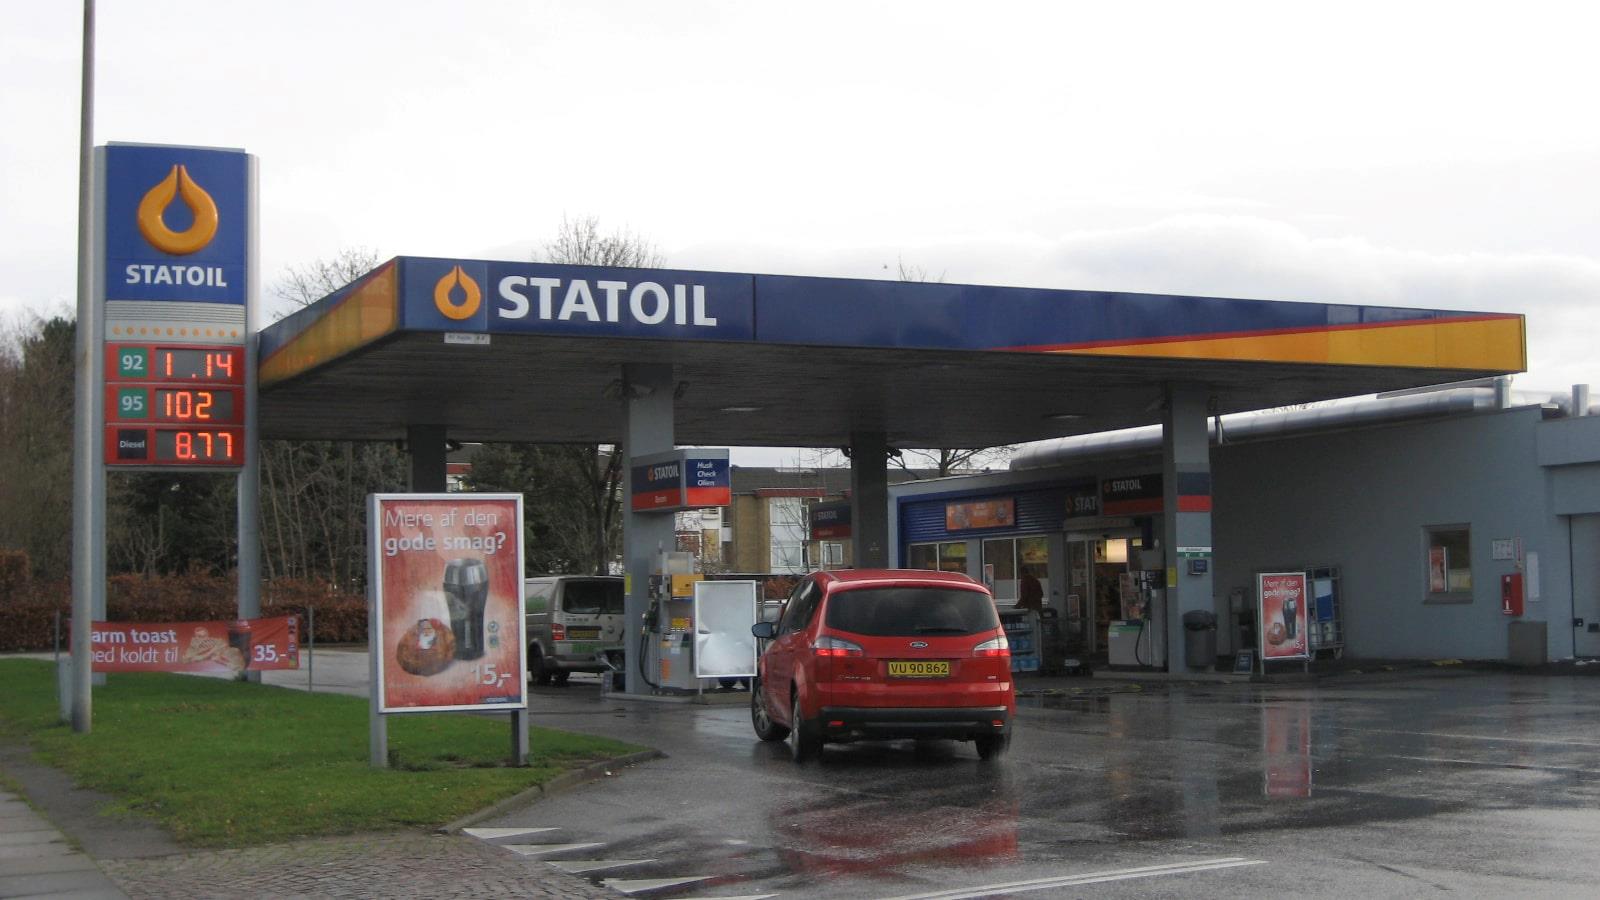 Red yellow-plated car drives into Statoil petrol station